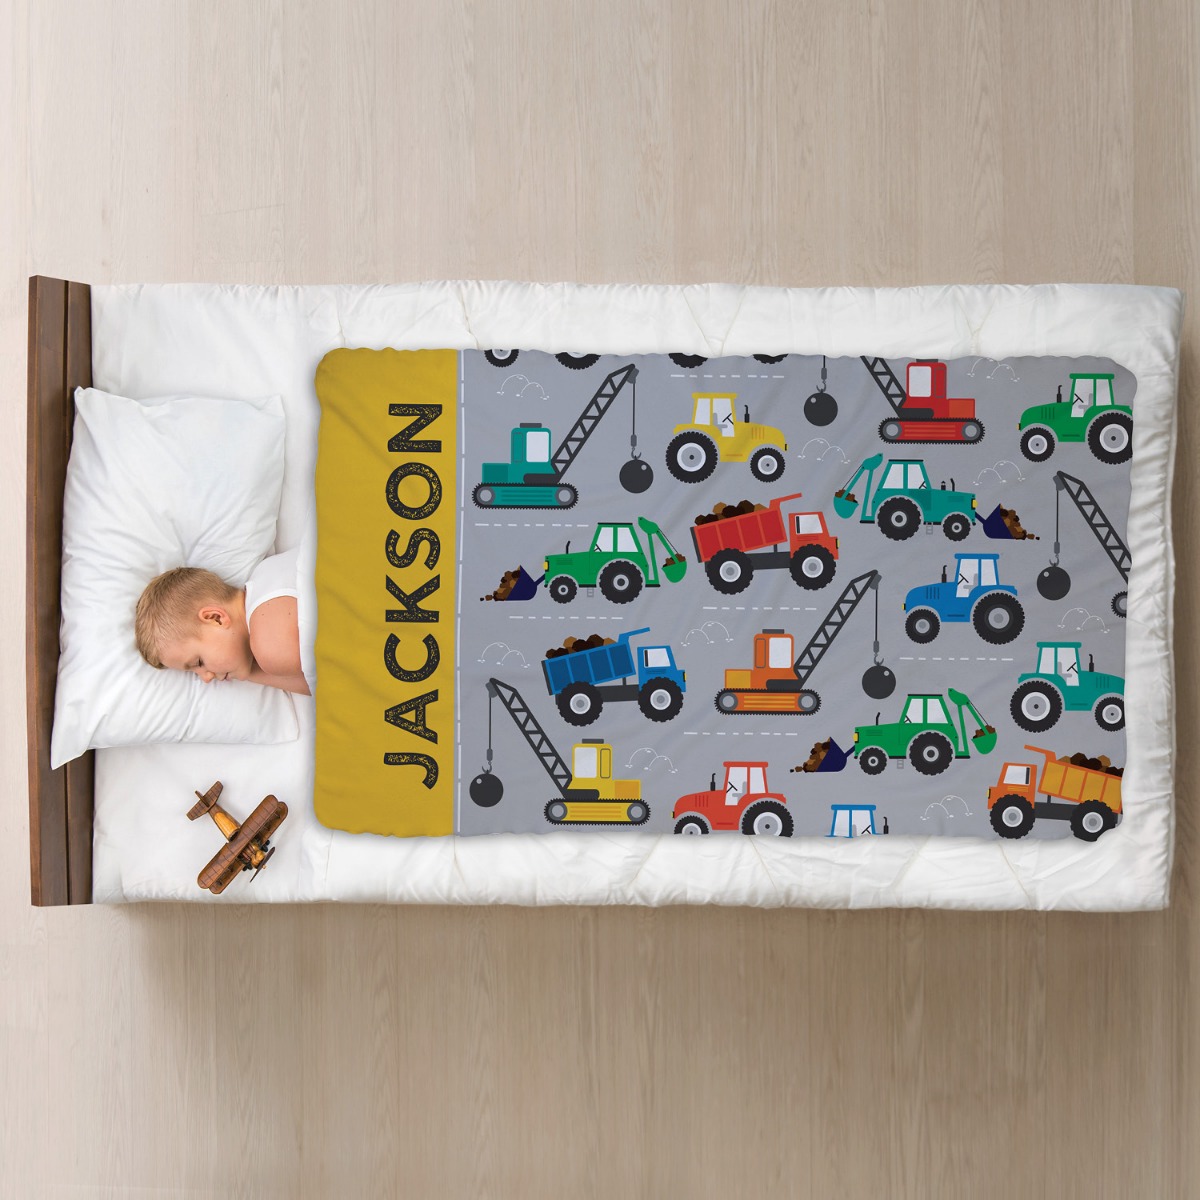 Construction Truck Personalized Fuzzy Throw Blanket 